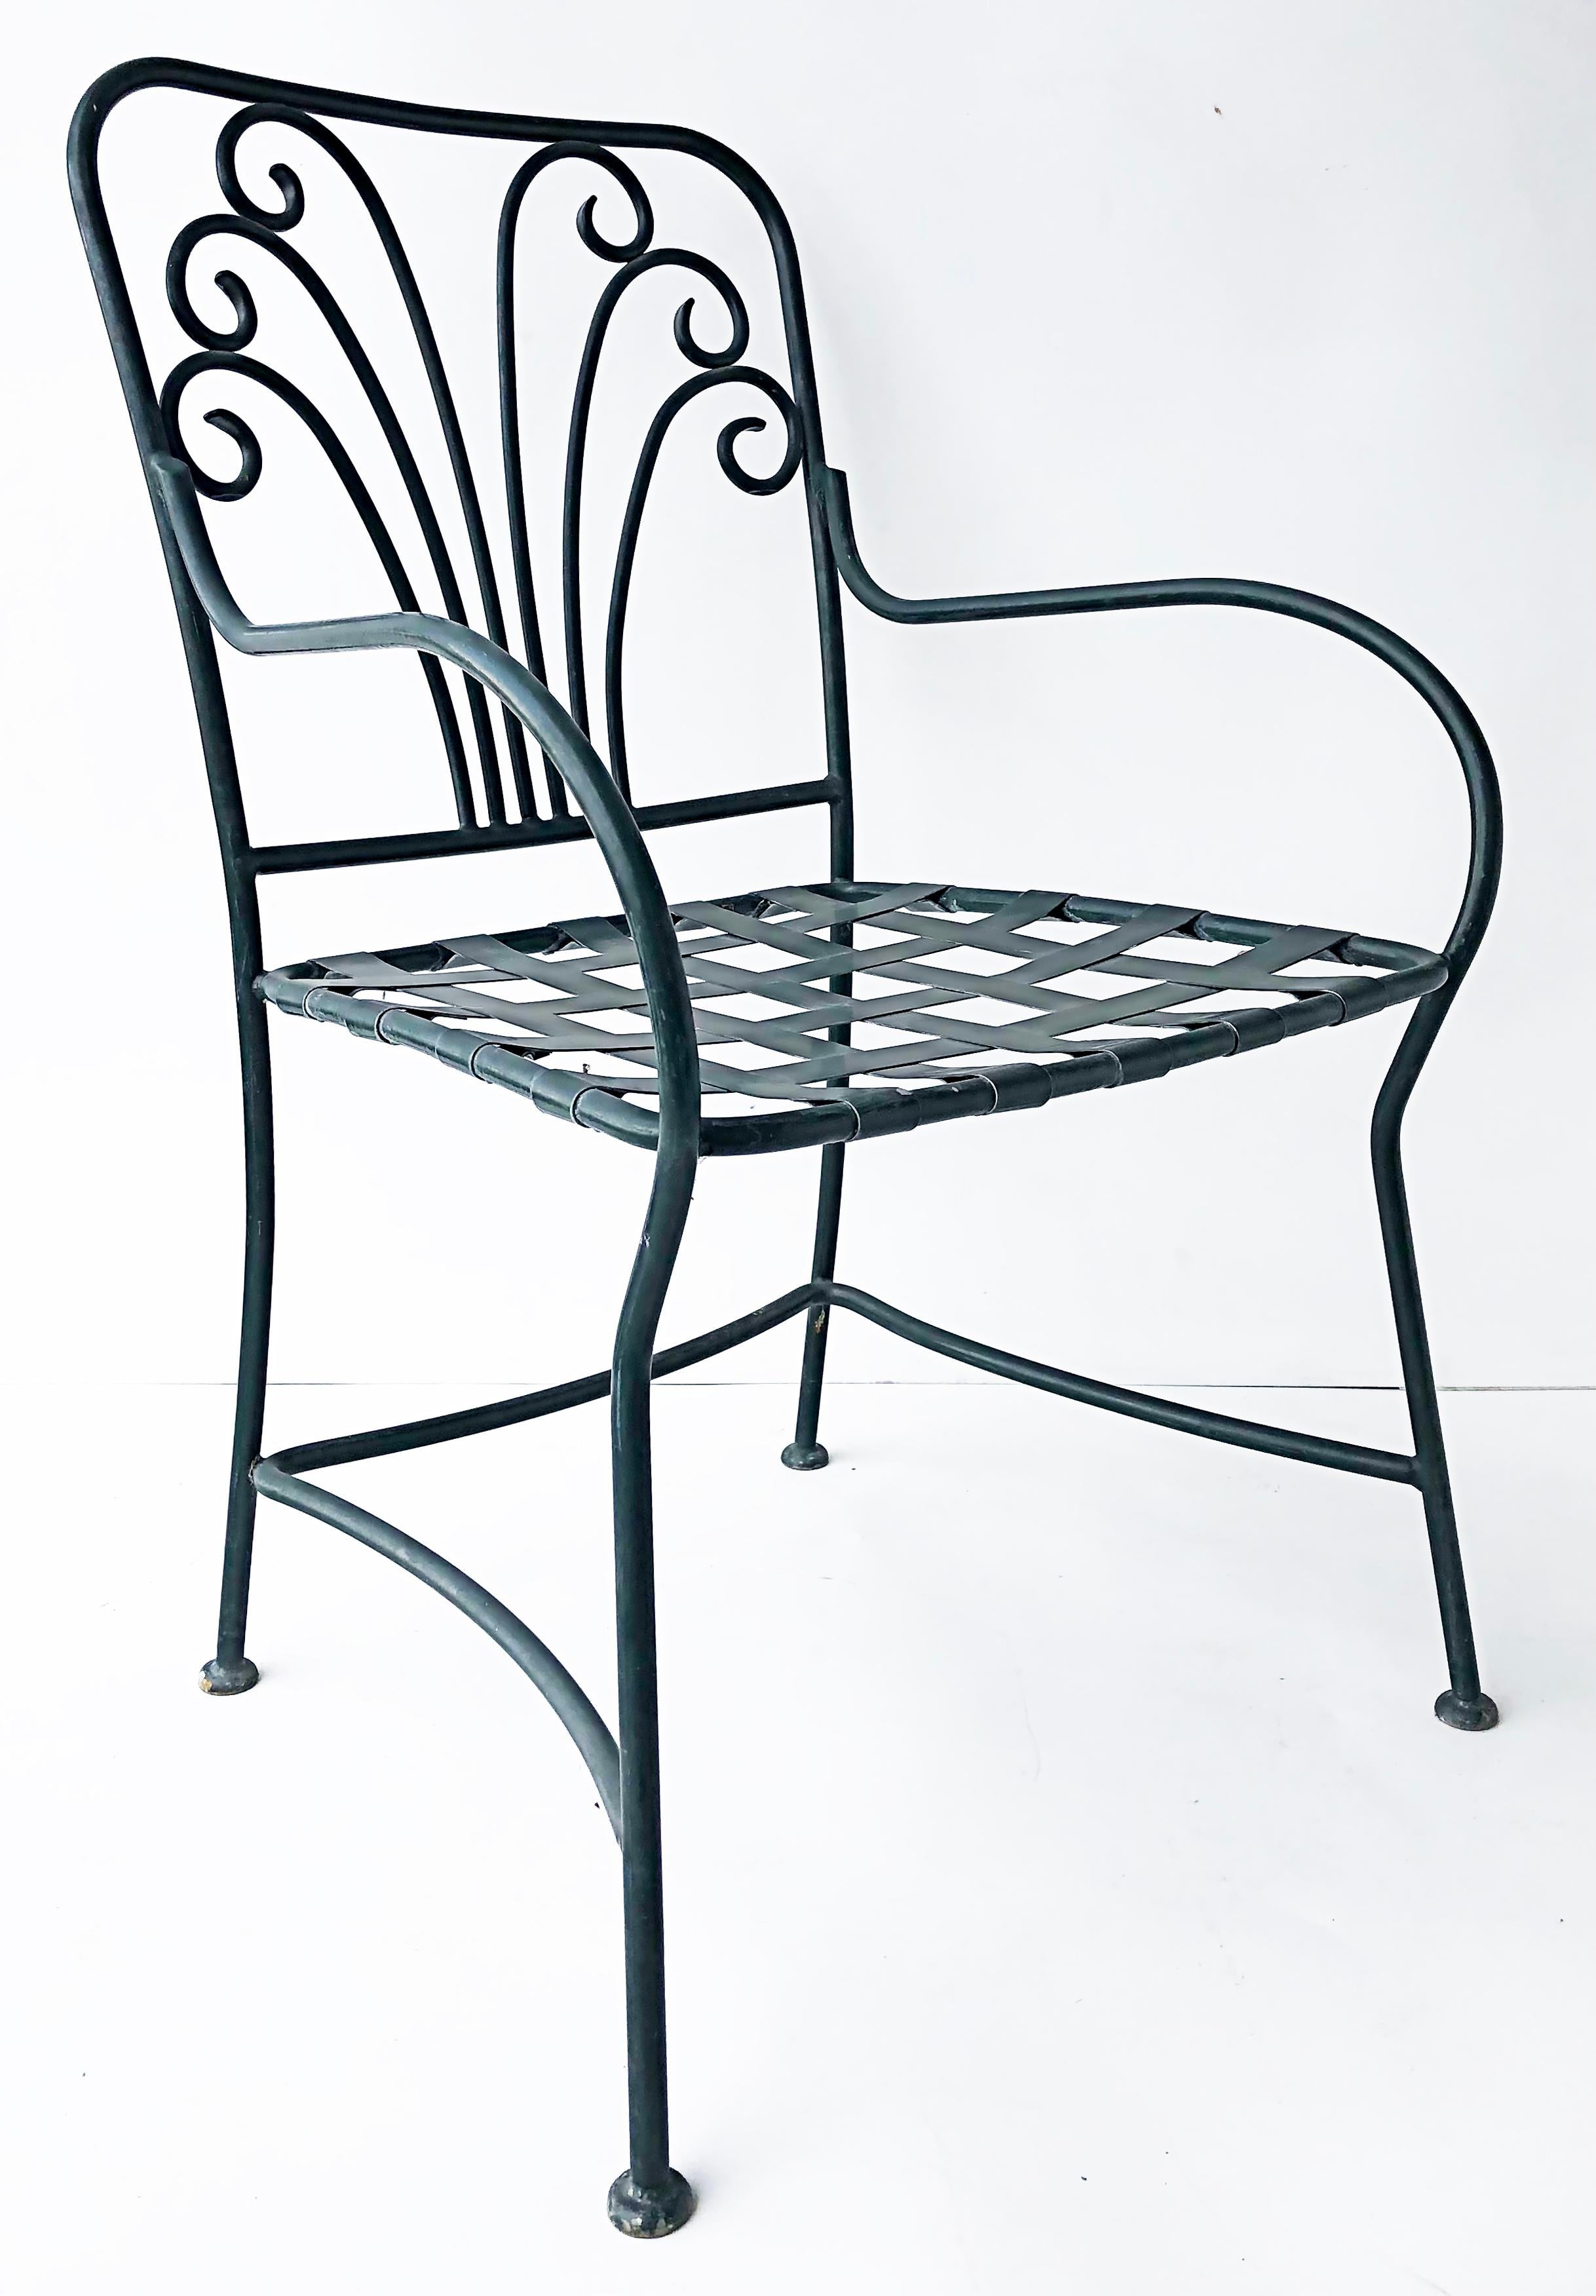 American Wrought Iron Powder-Coated Garden/Patio Dining Chairs, Set of 8